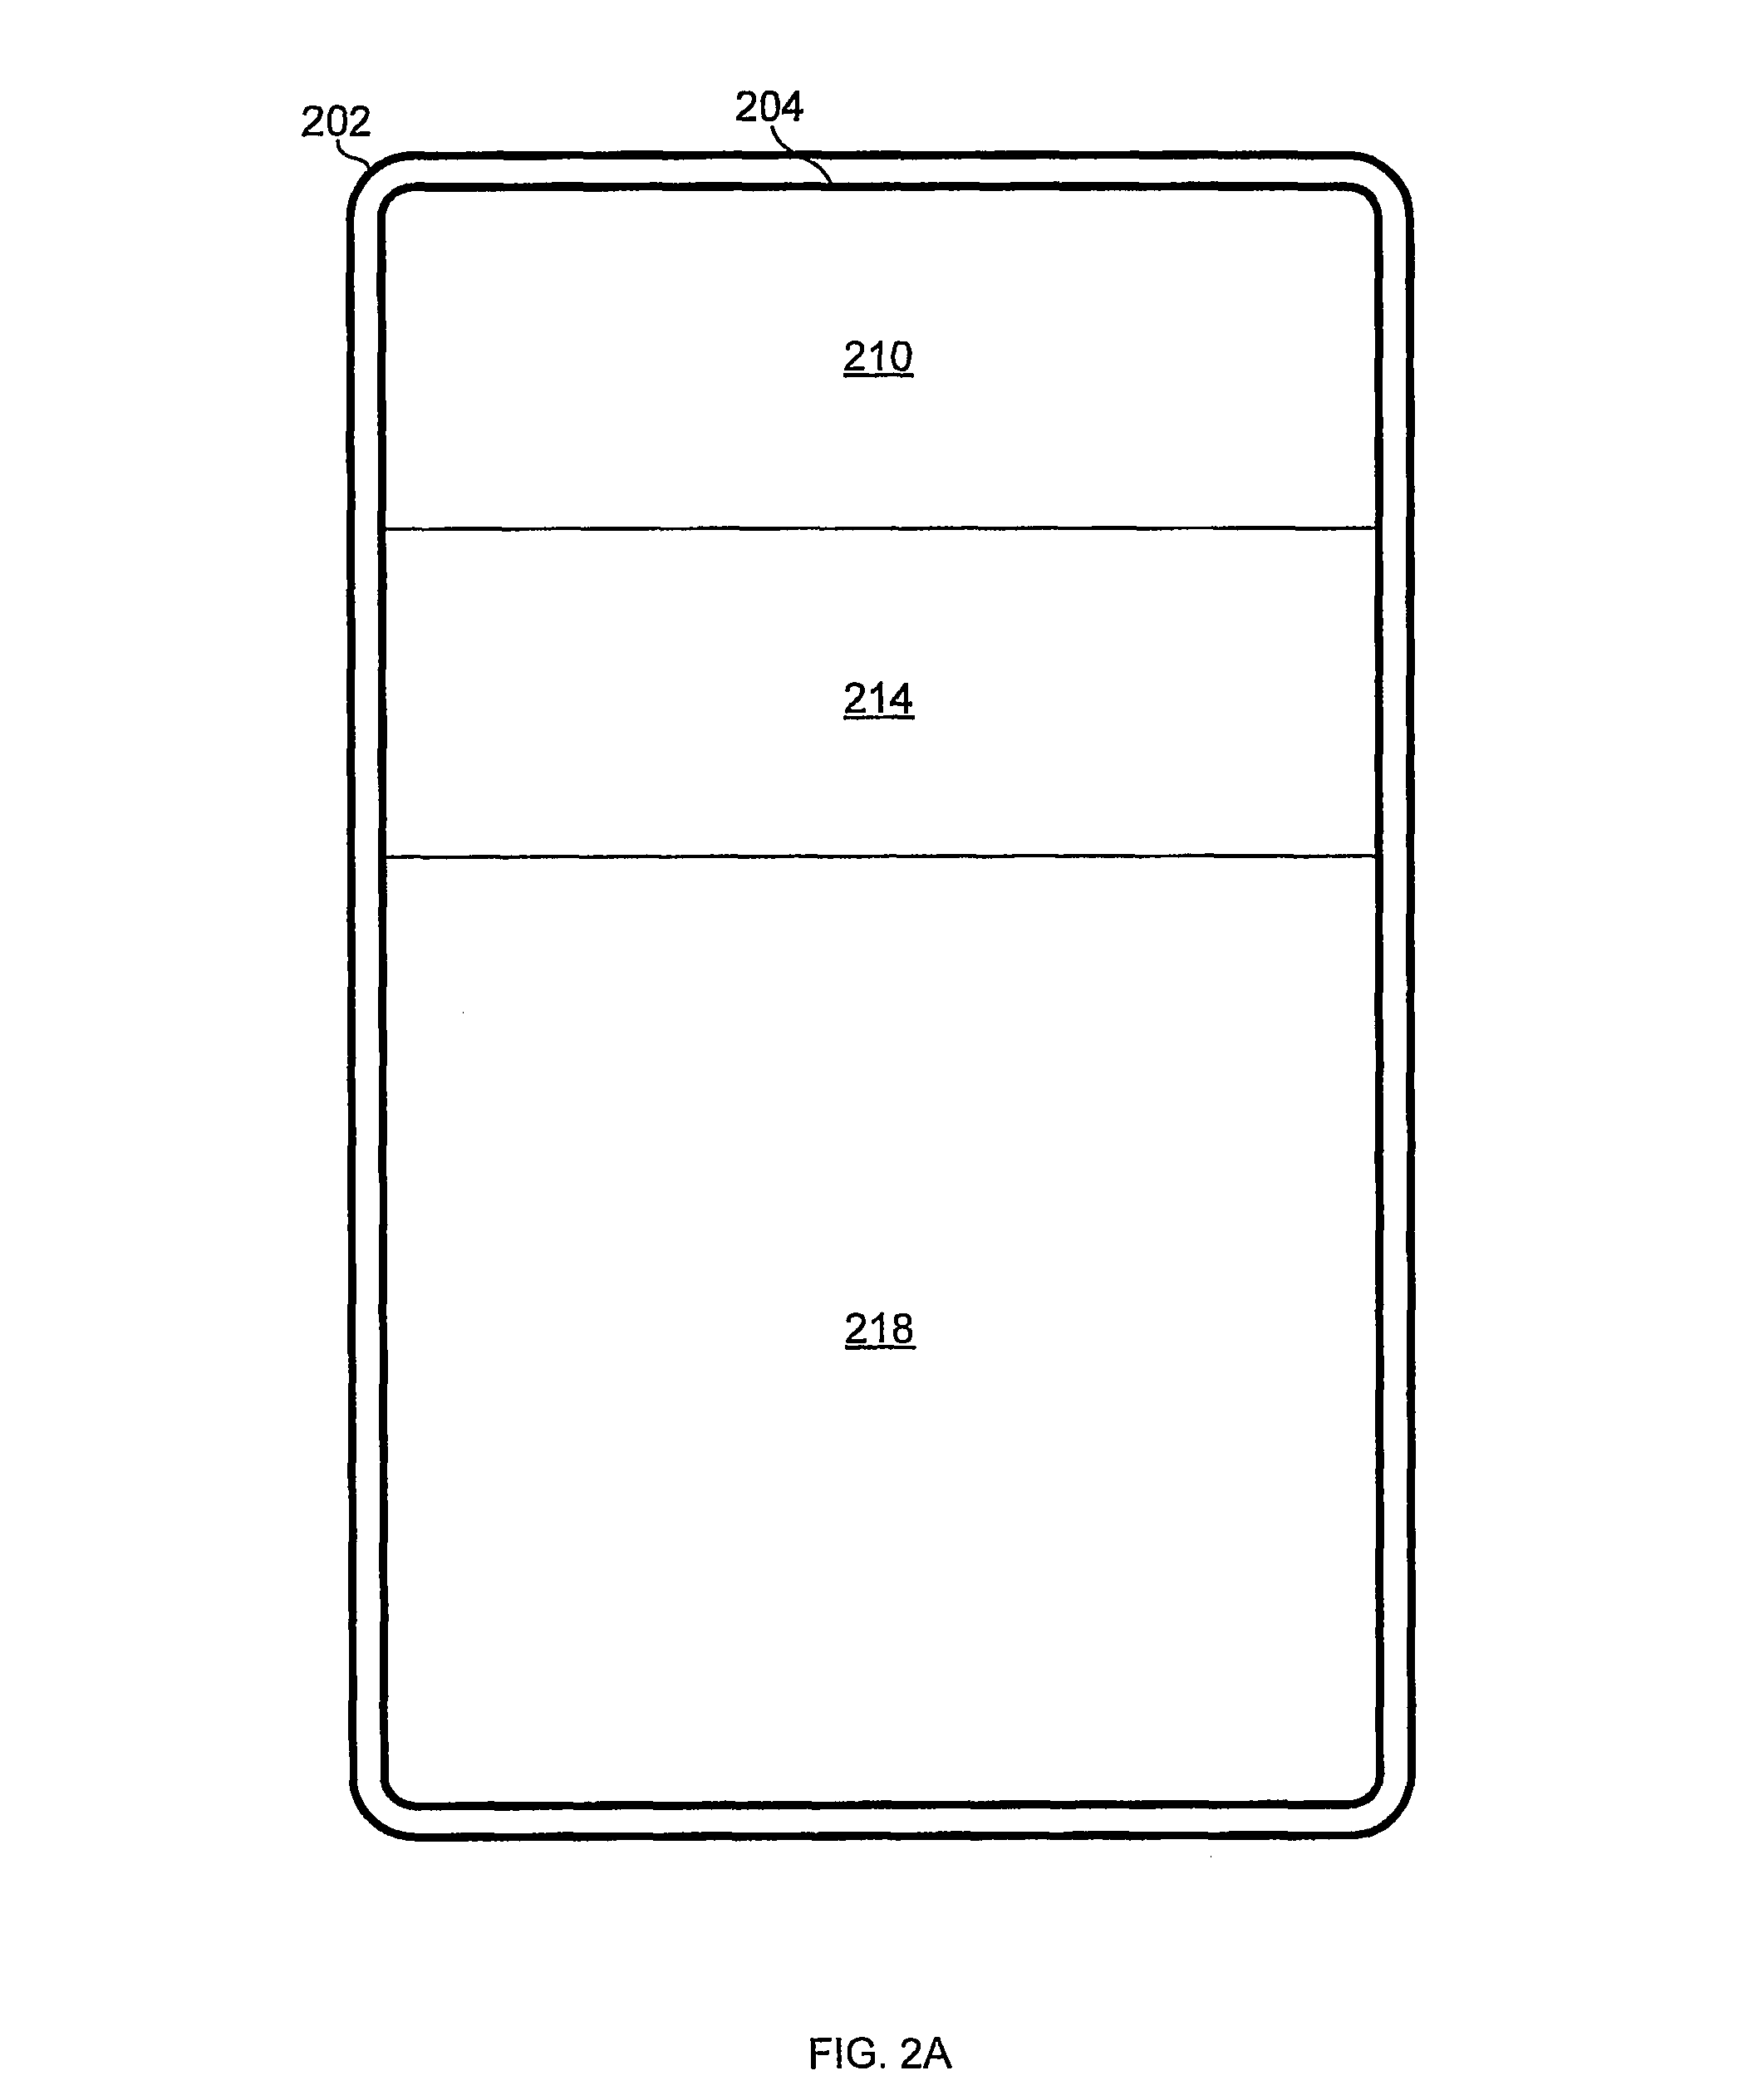 Method and system for providing a user interface that enables control of a device via respiratory and/or tactual input